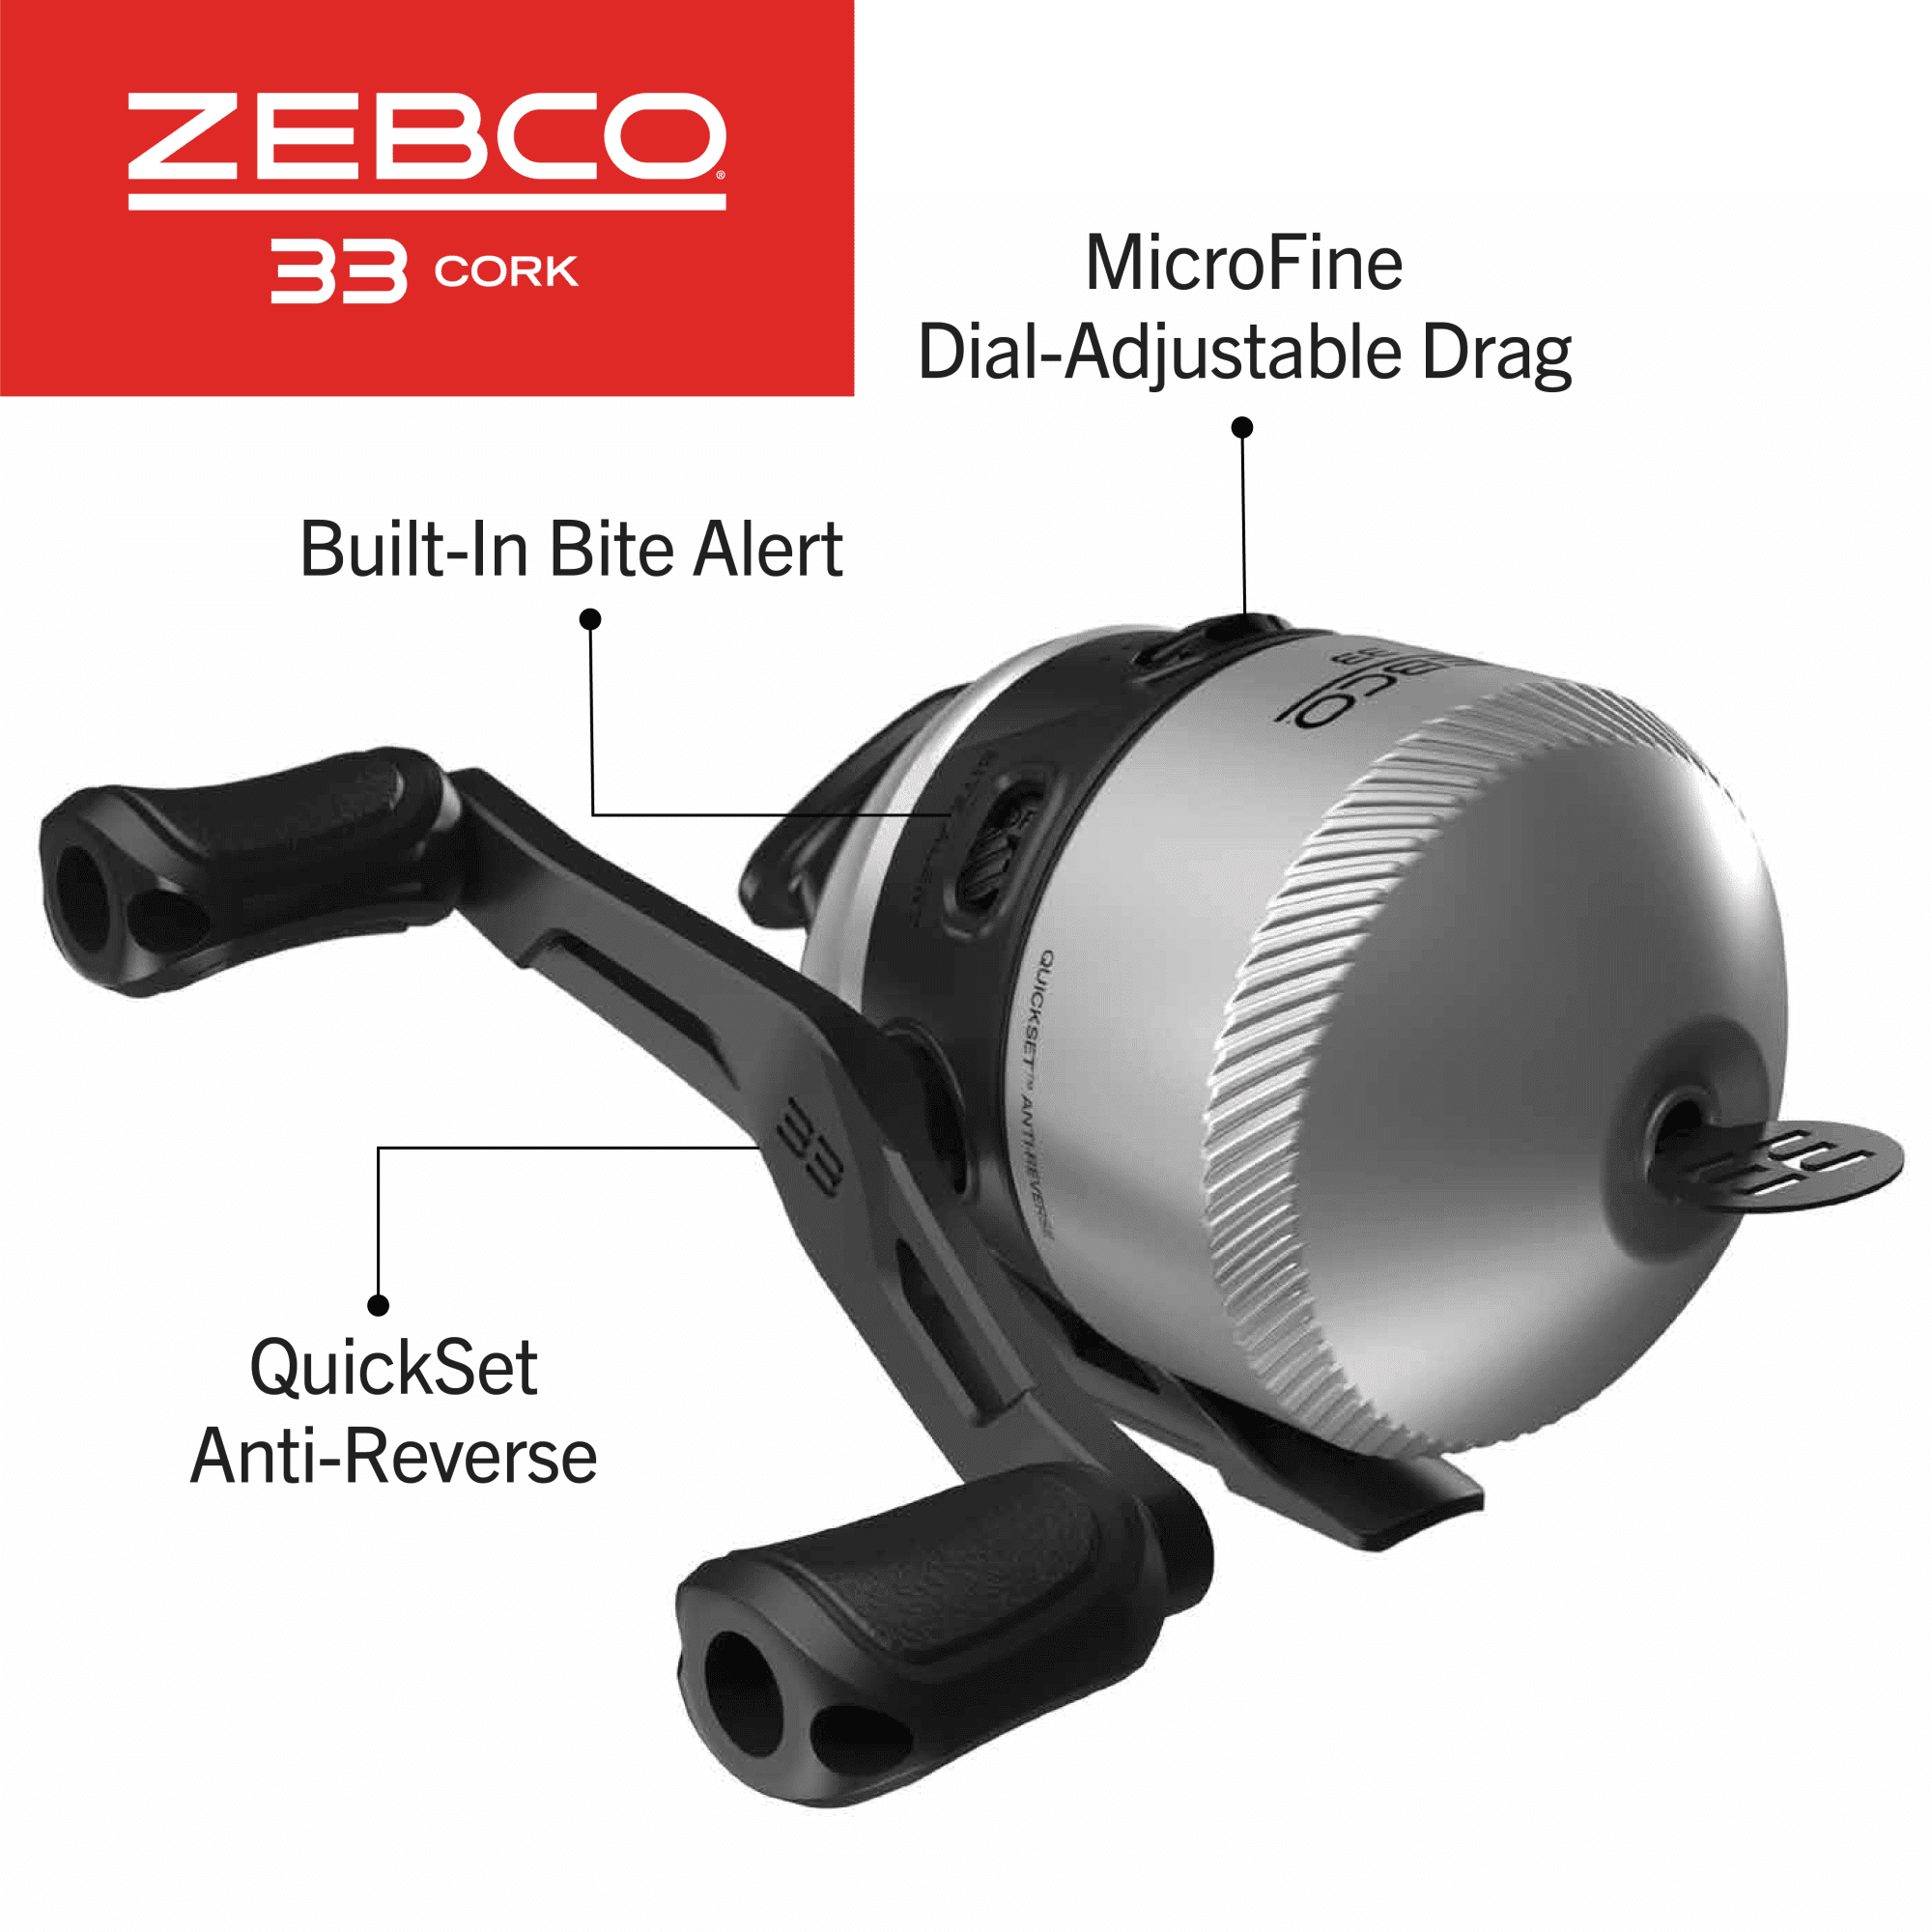 Zebco 33 Cork Micro Trigger Spincast Reel and Fishing Rod Combo,  Pre-Spooled 4-Pound Line, Silver/Black 